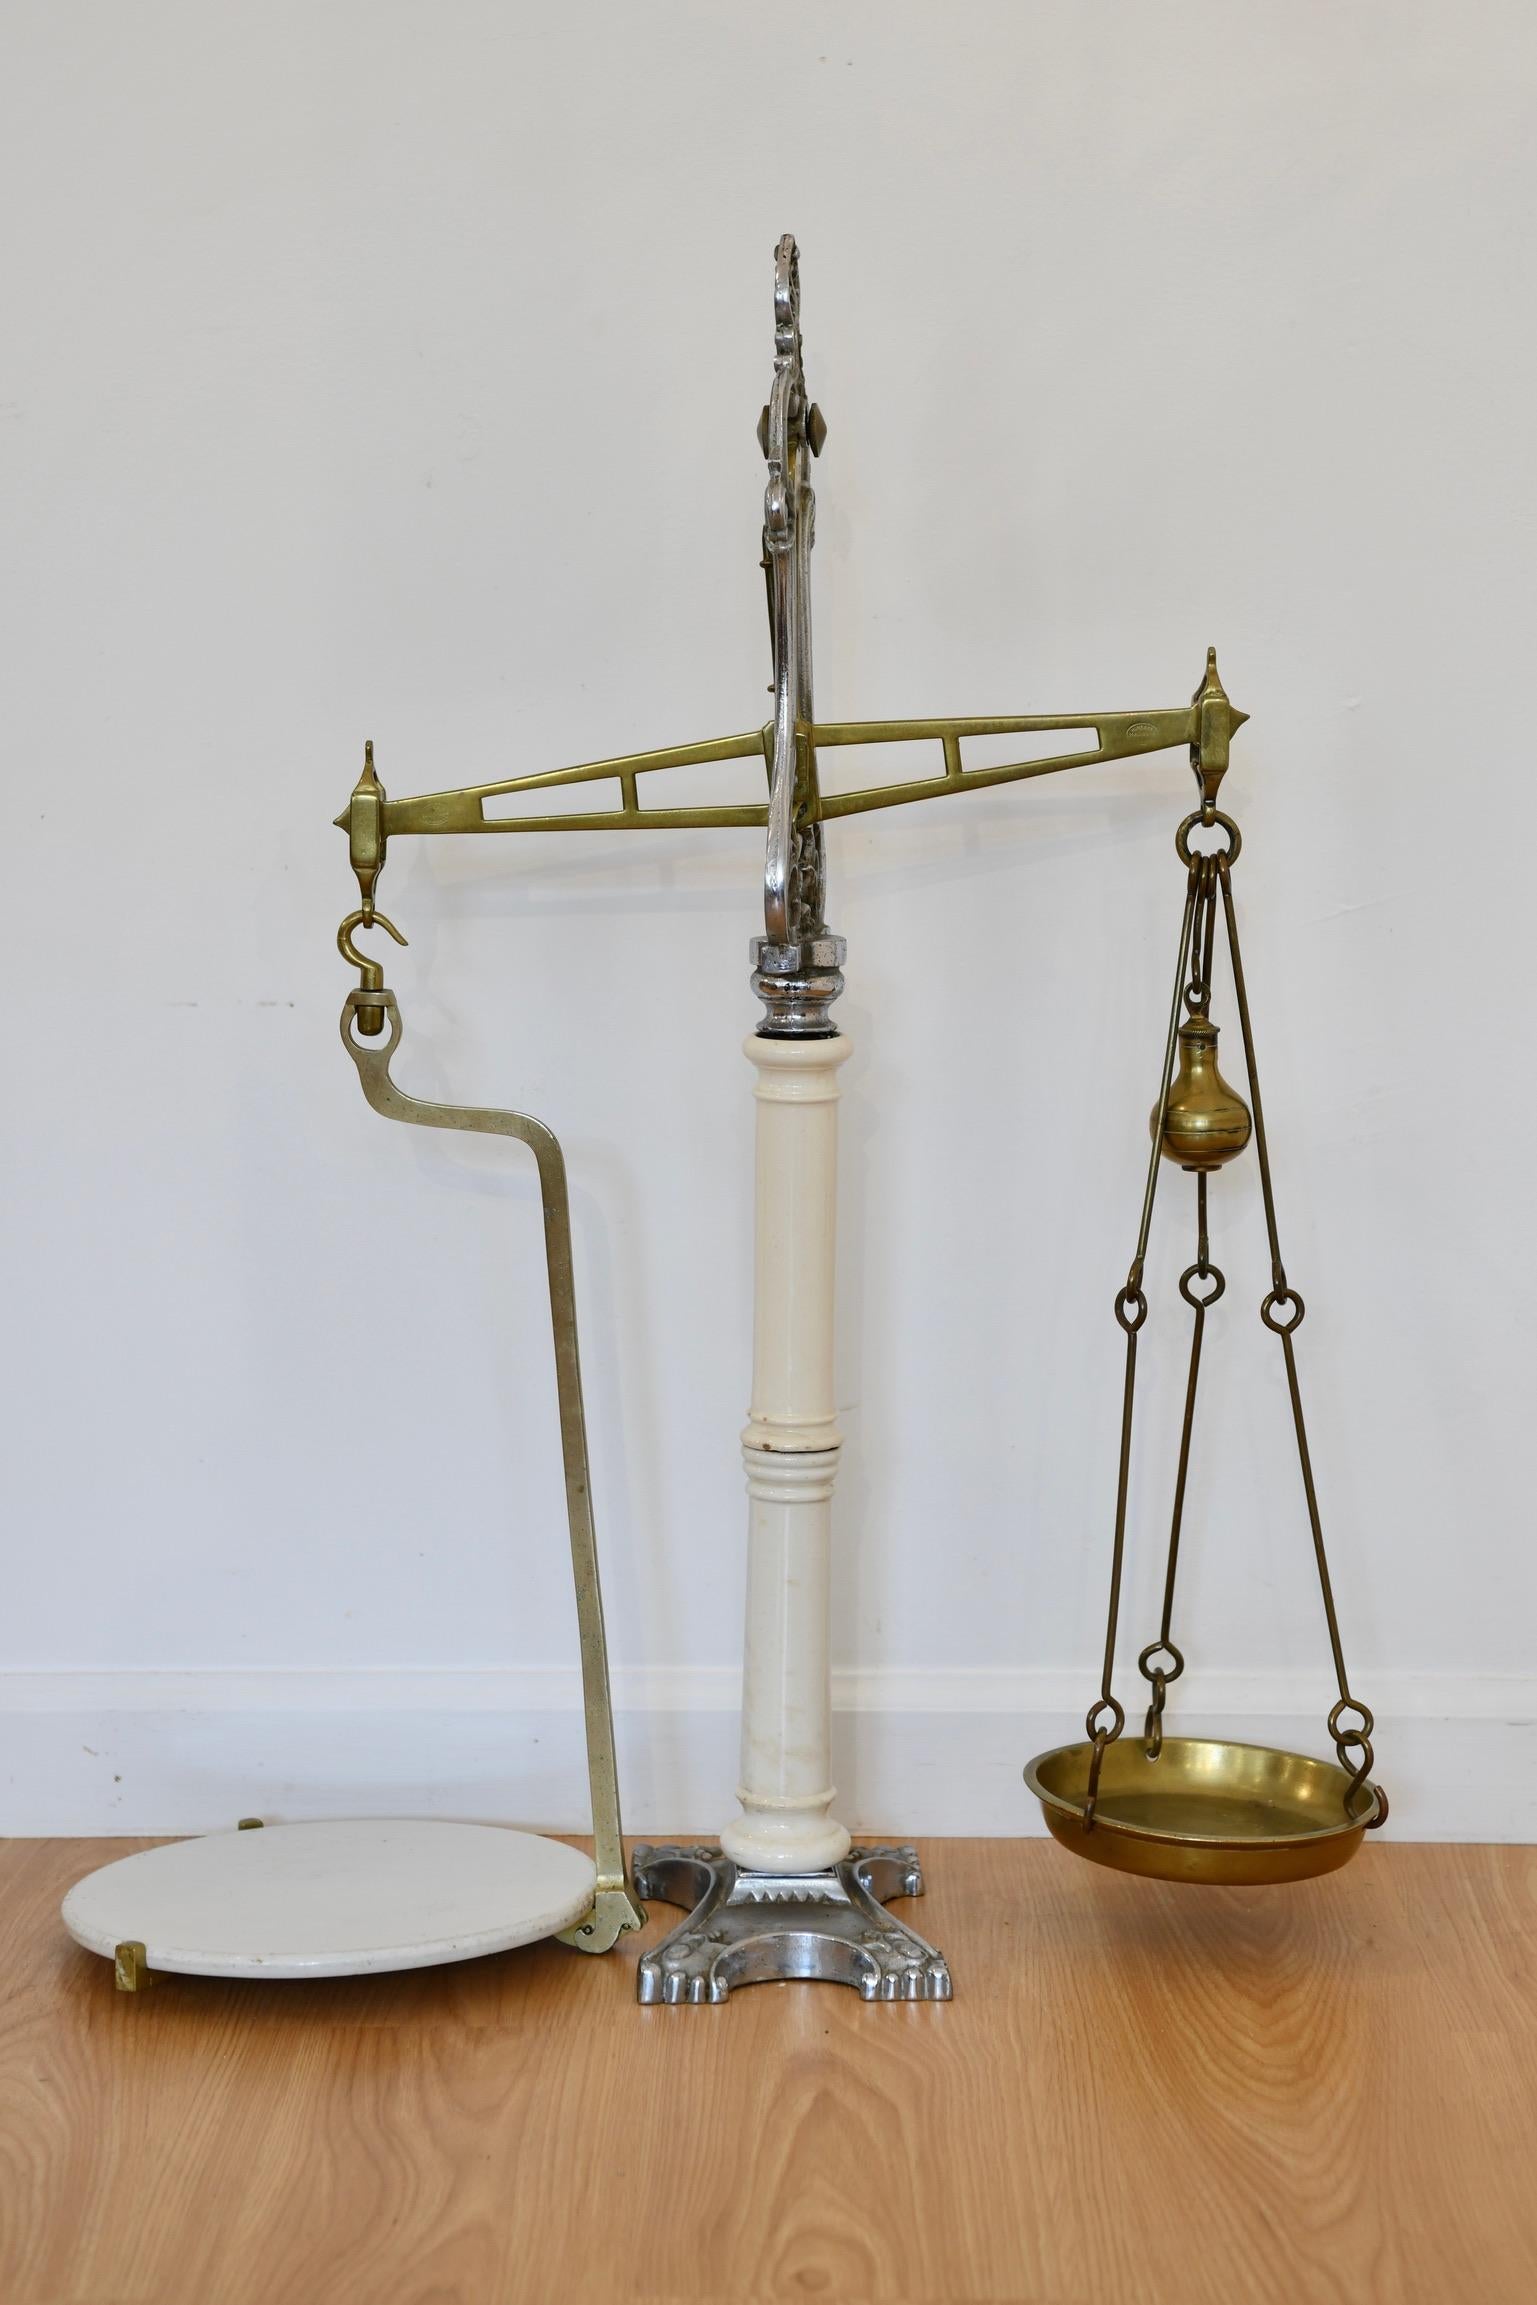 Victorian brass balance scale made by Hunt & Co, England. Dimensions: 32.5